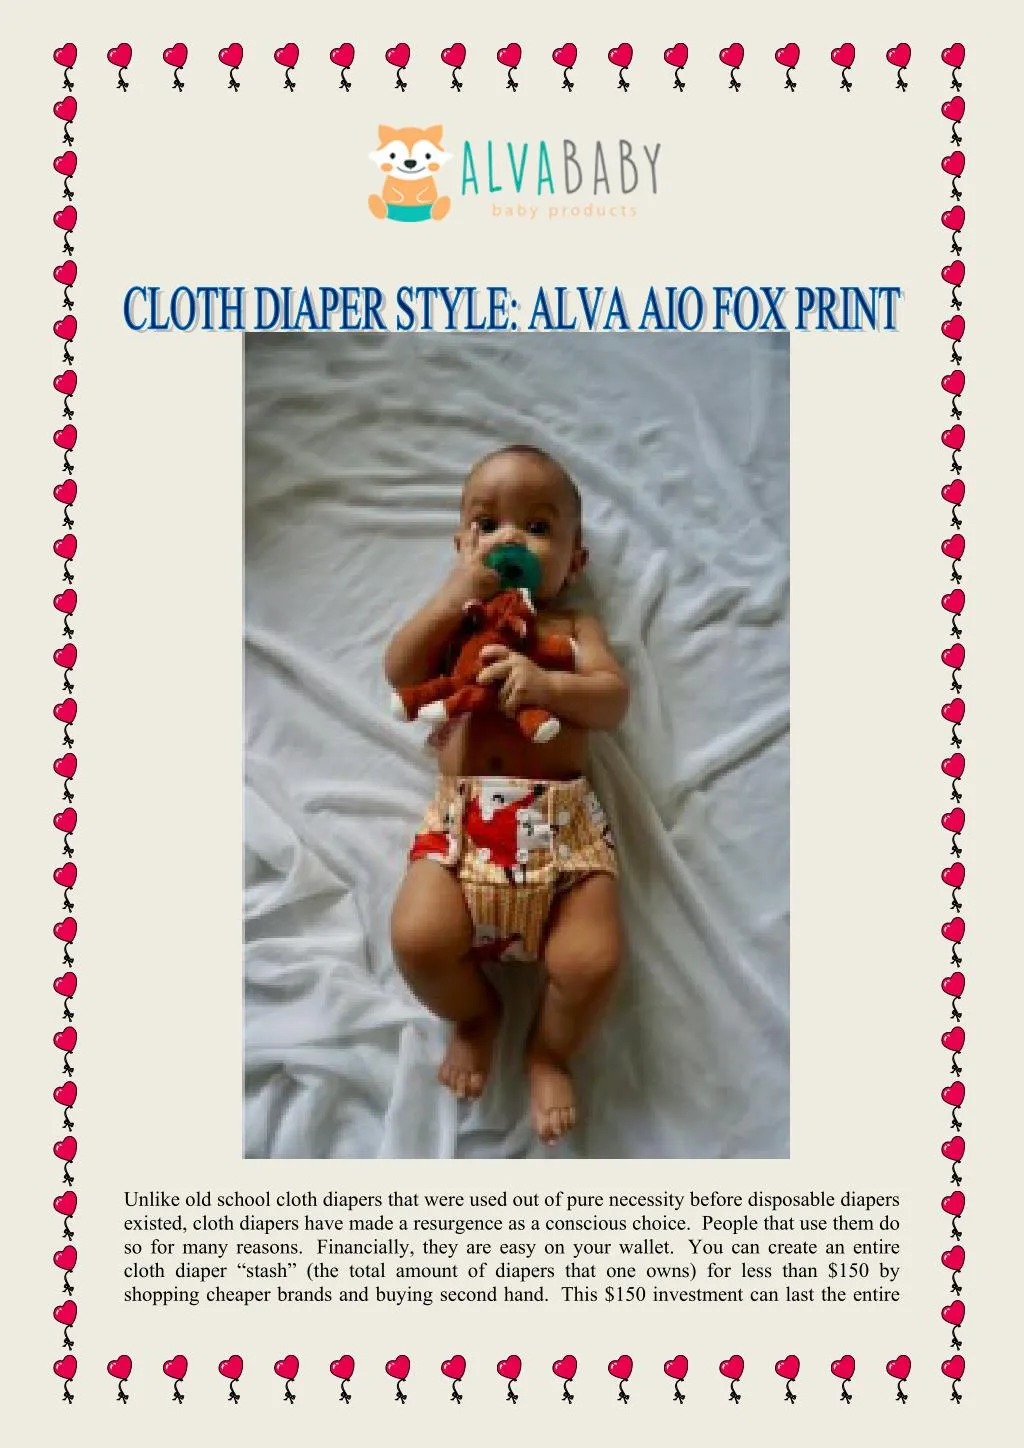 unlike old school cloth diapers that were used